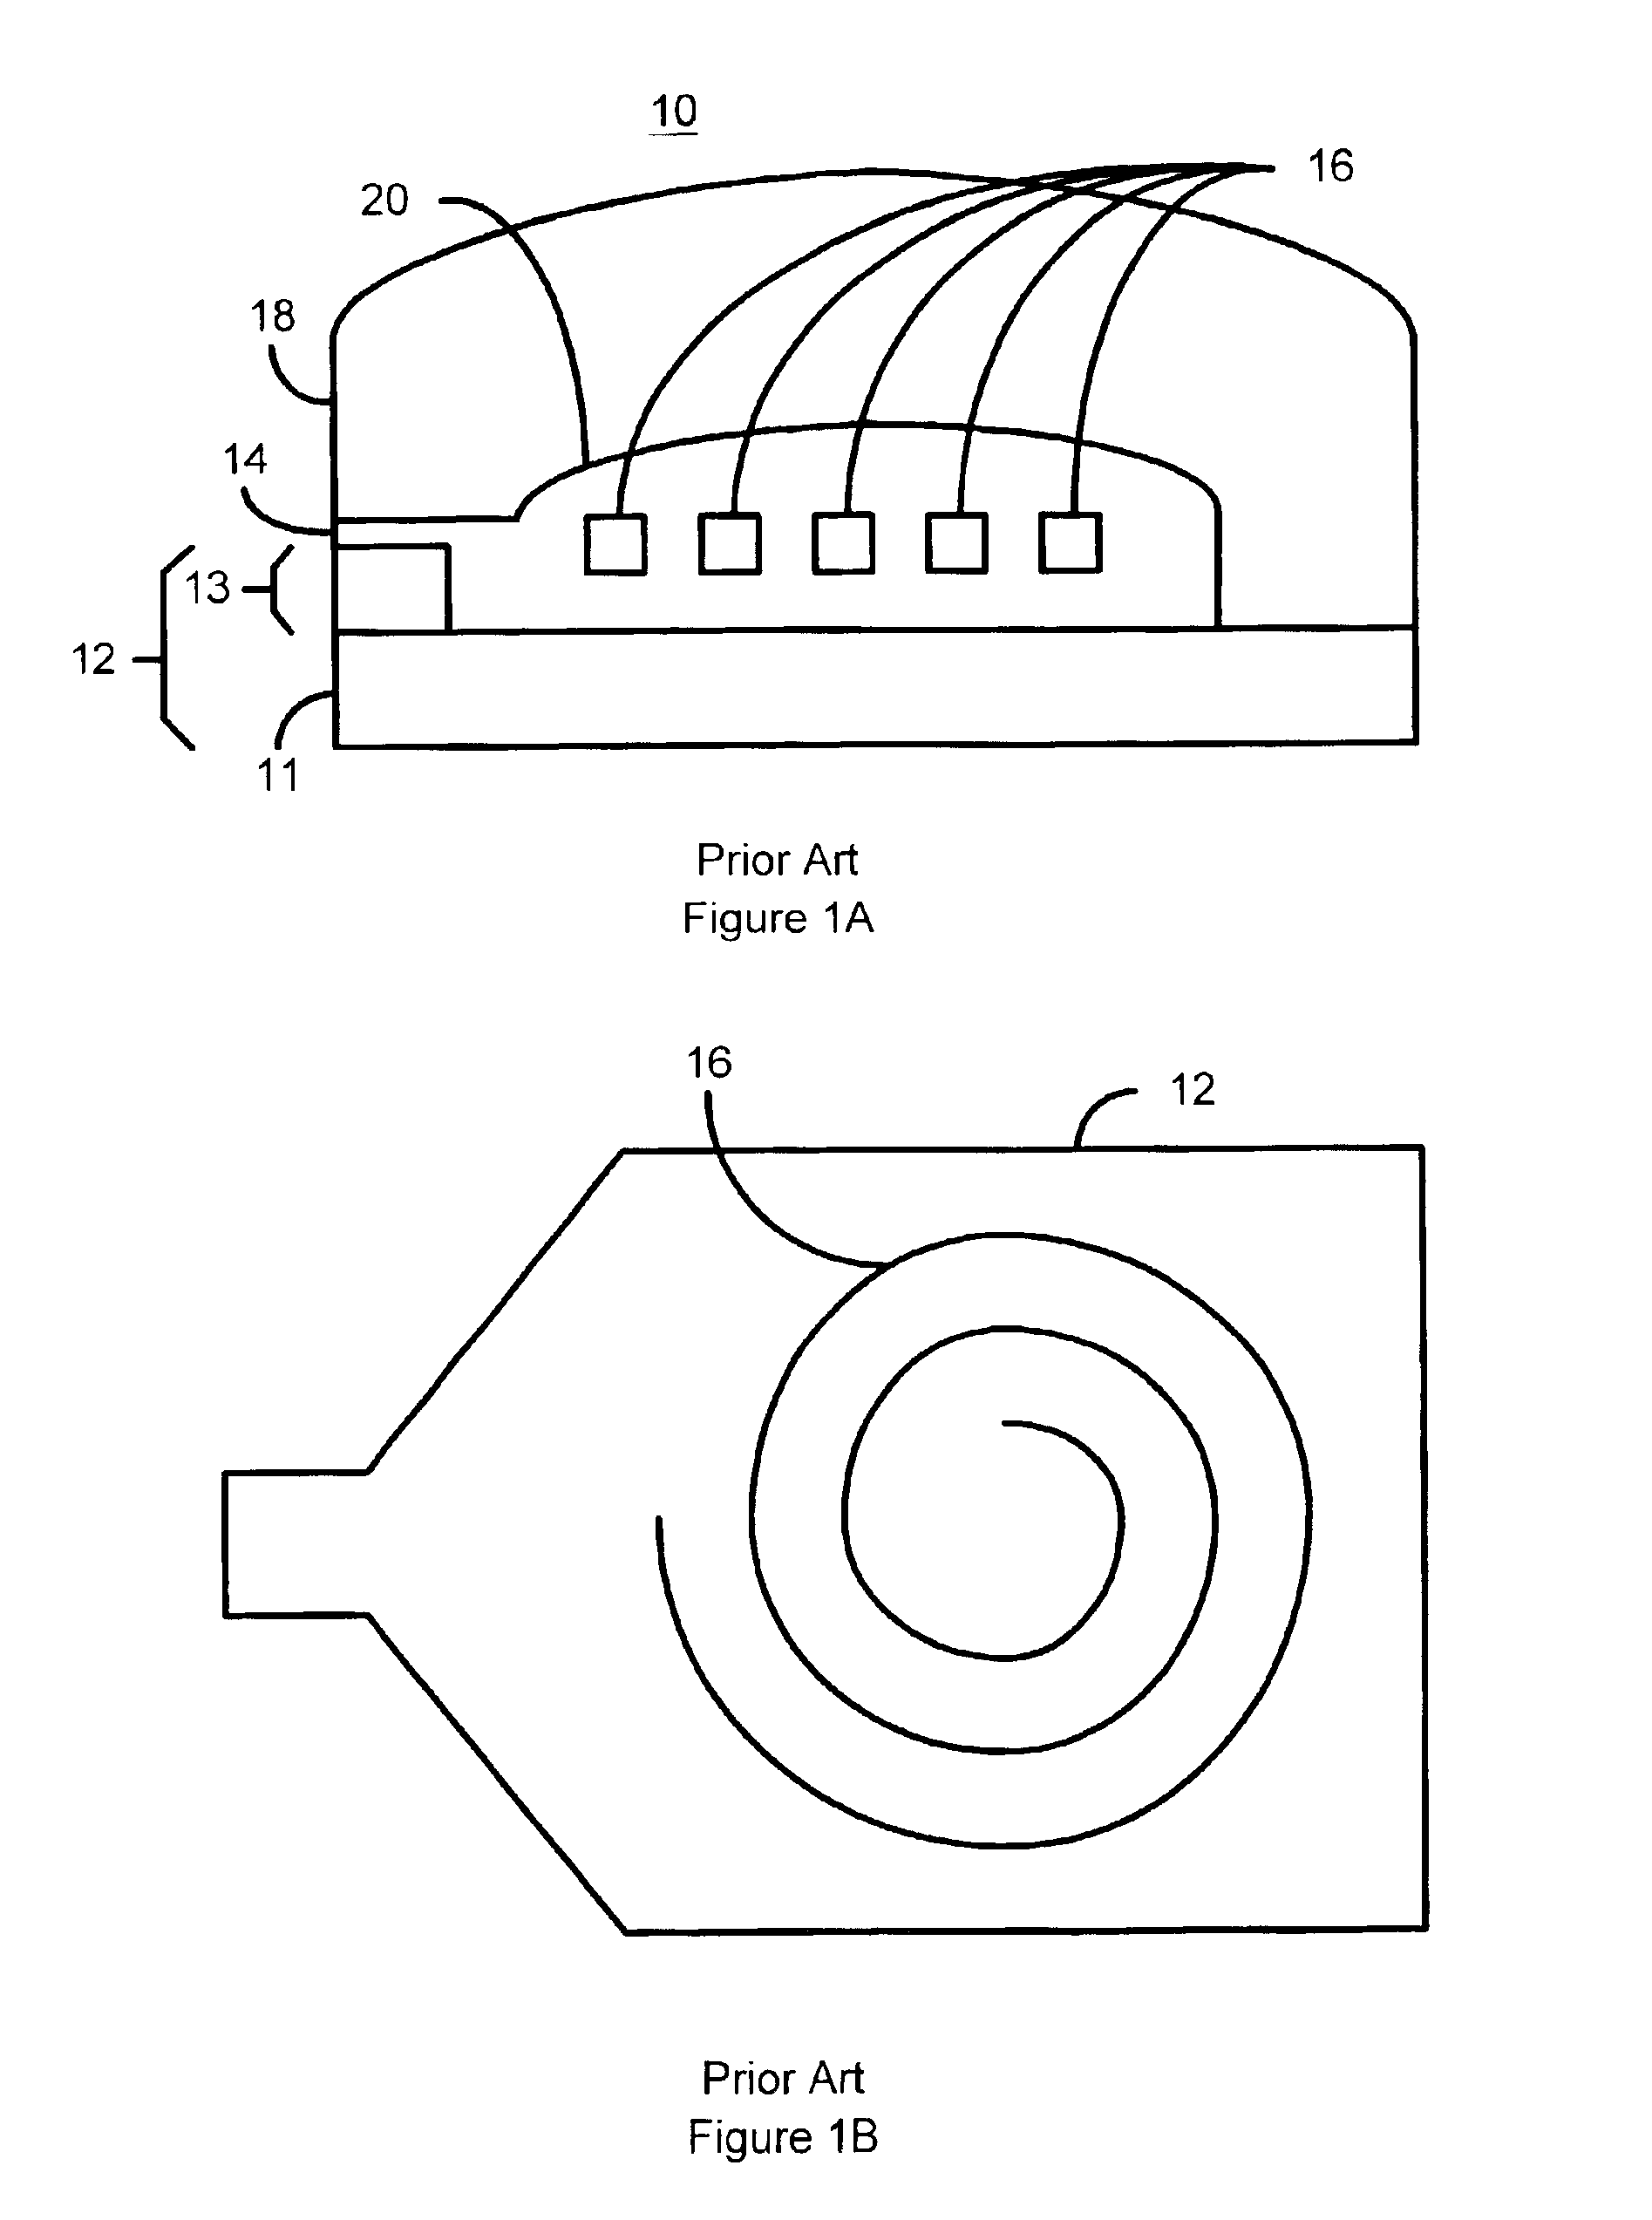 Coil inductive writer having a low inductance and short yoke length